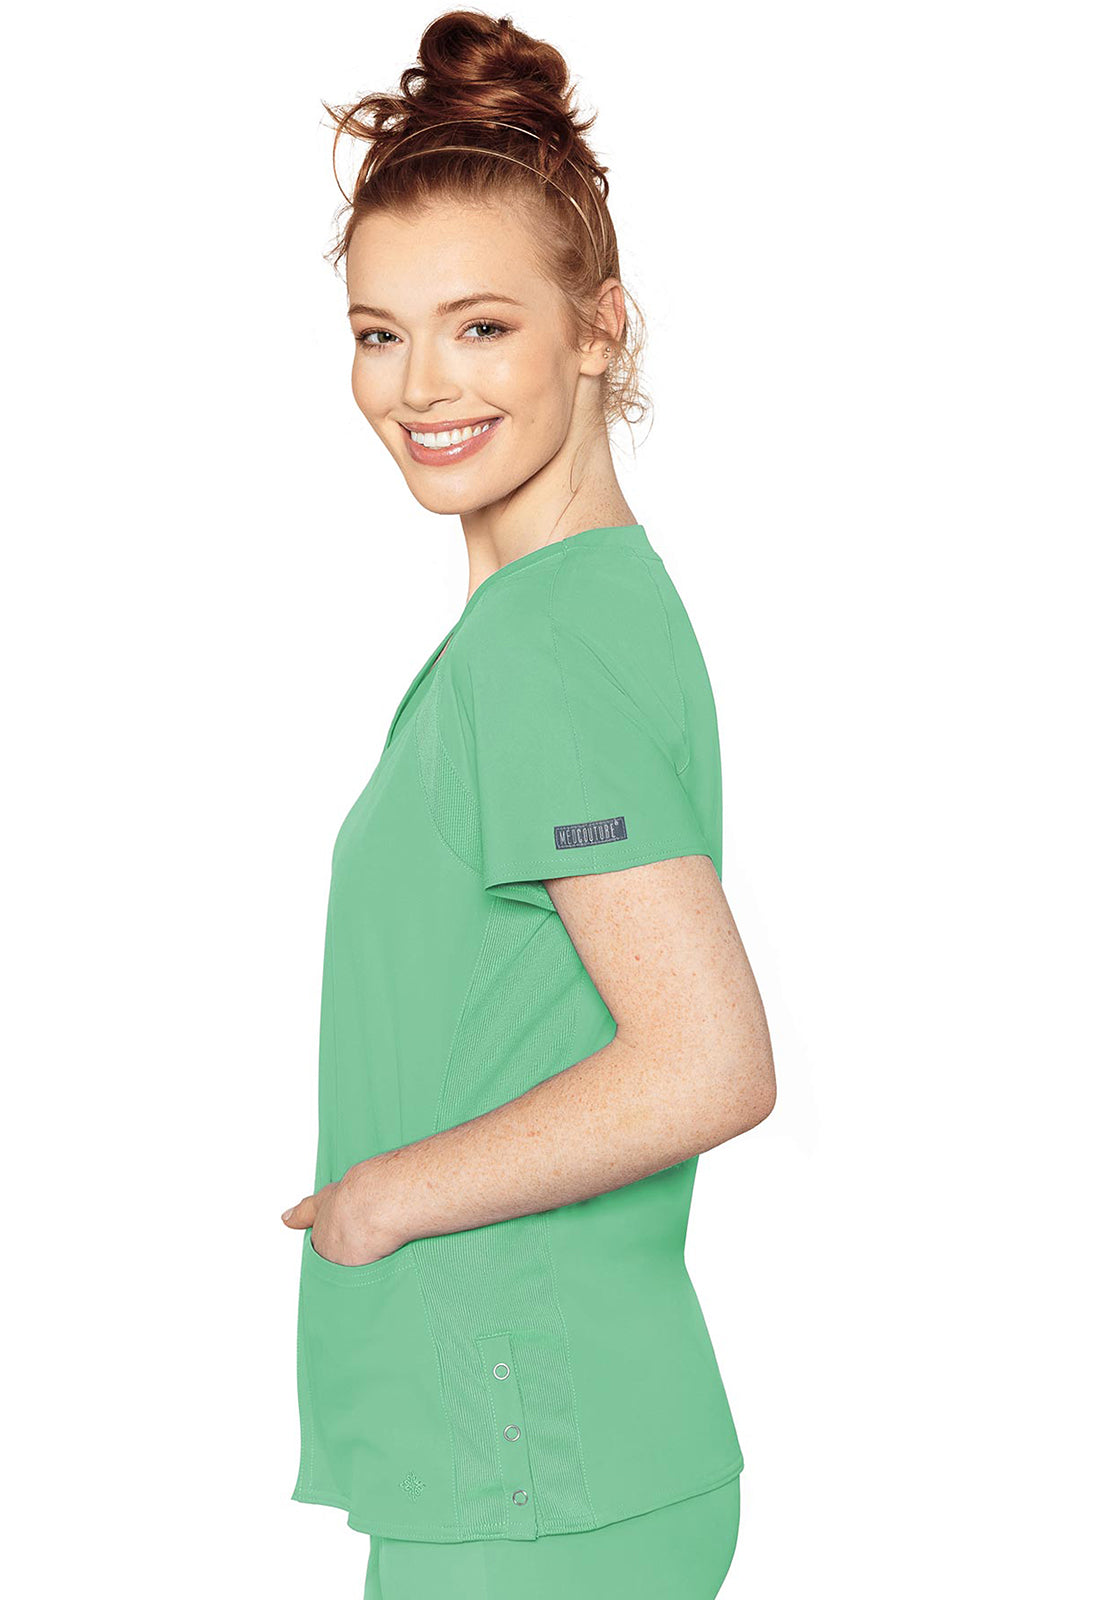 med couture scrubs